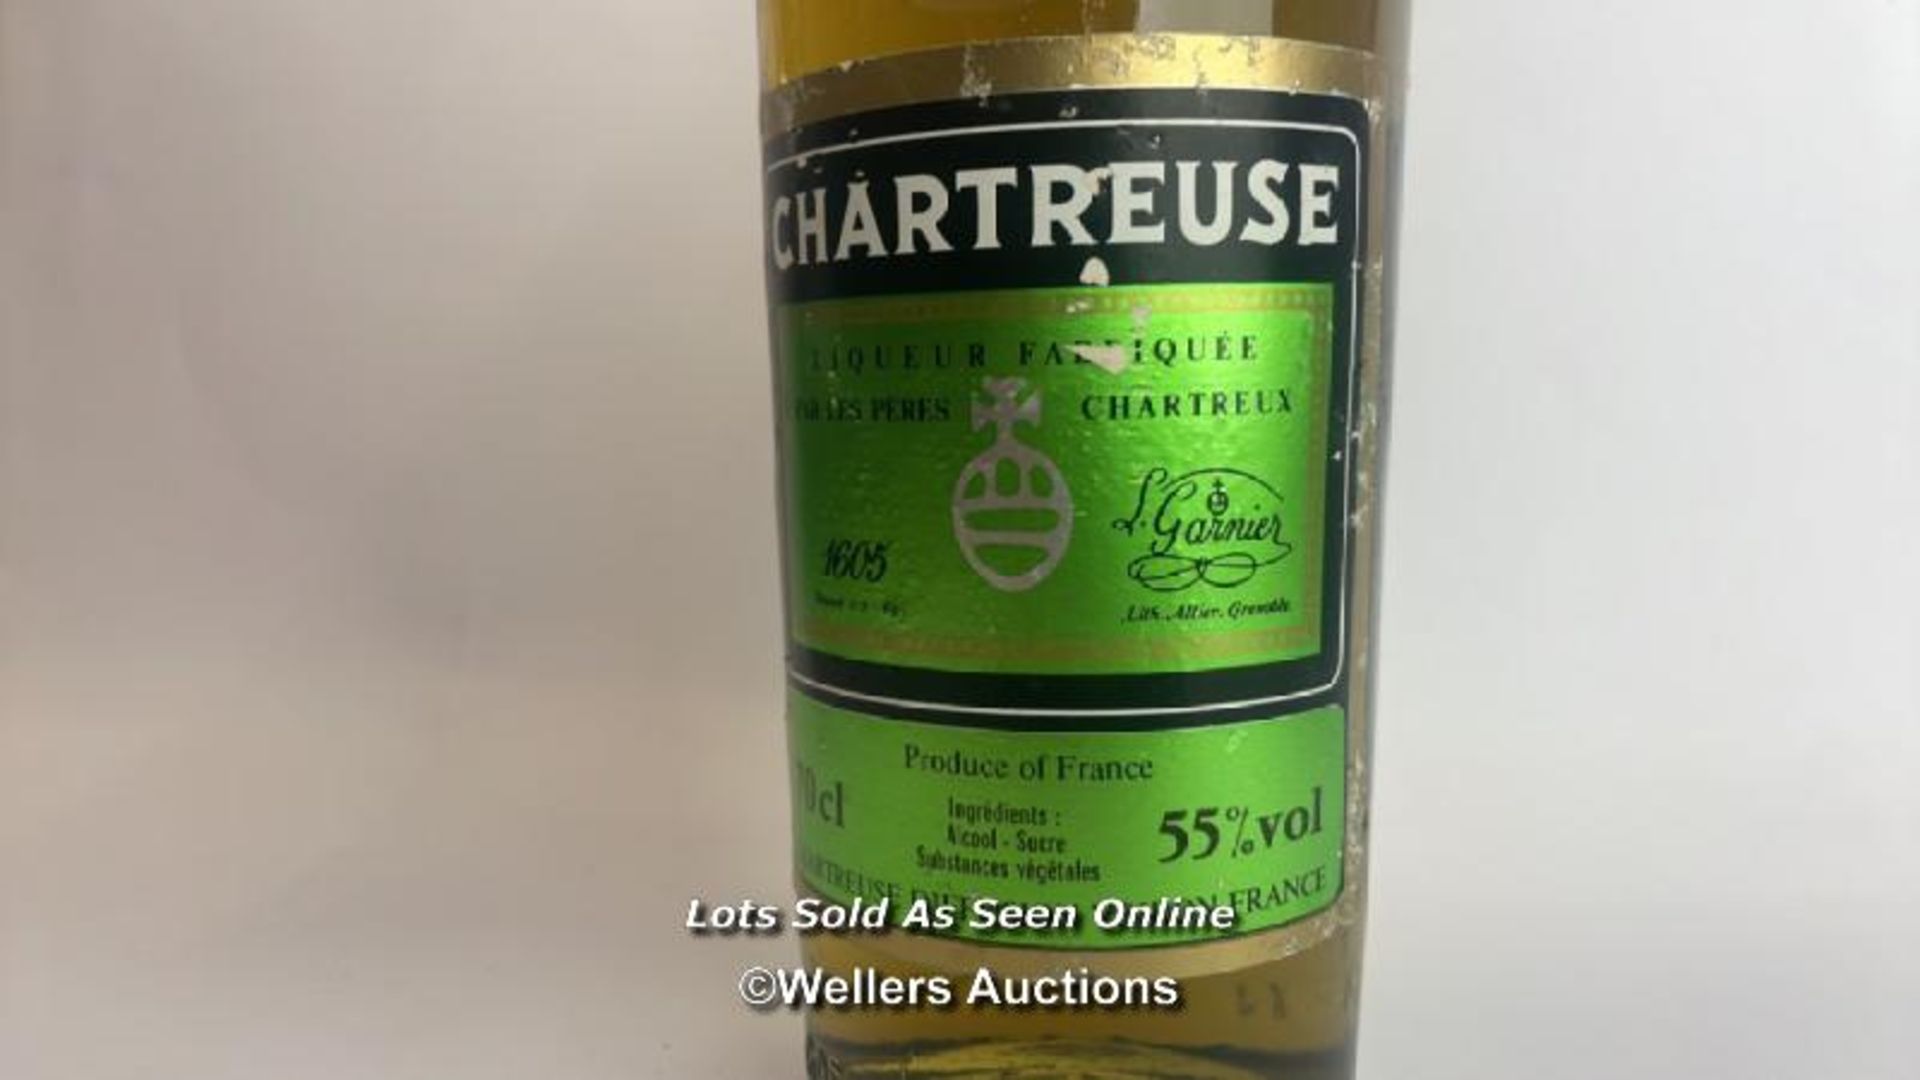 Chartreuse Liquer, 70cl, 55% vol / Please see images for fill level and general condition. Please be - Image 4 of 6